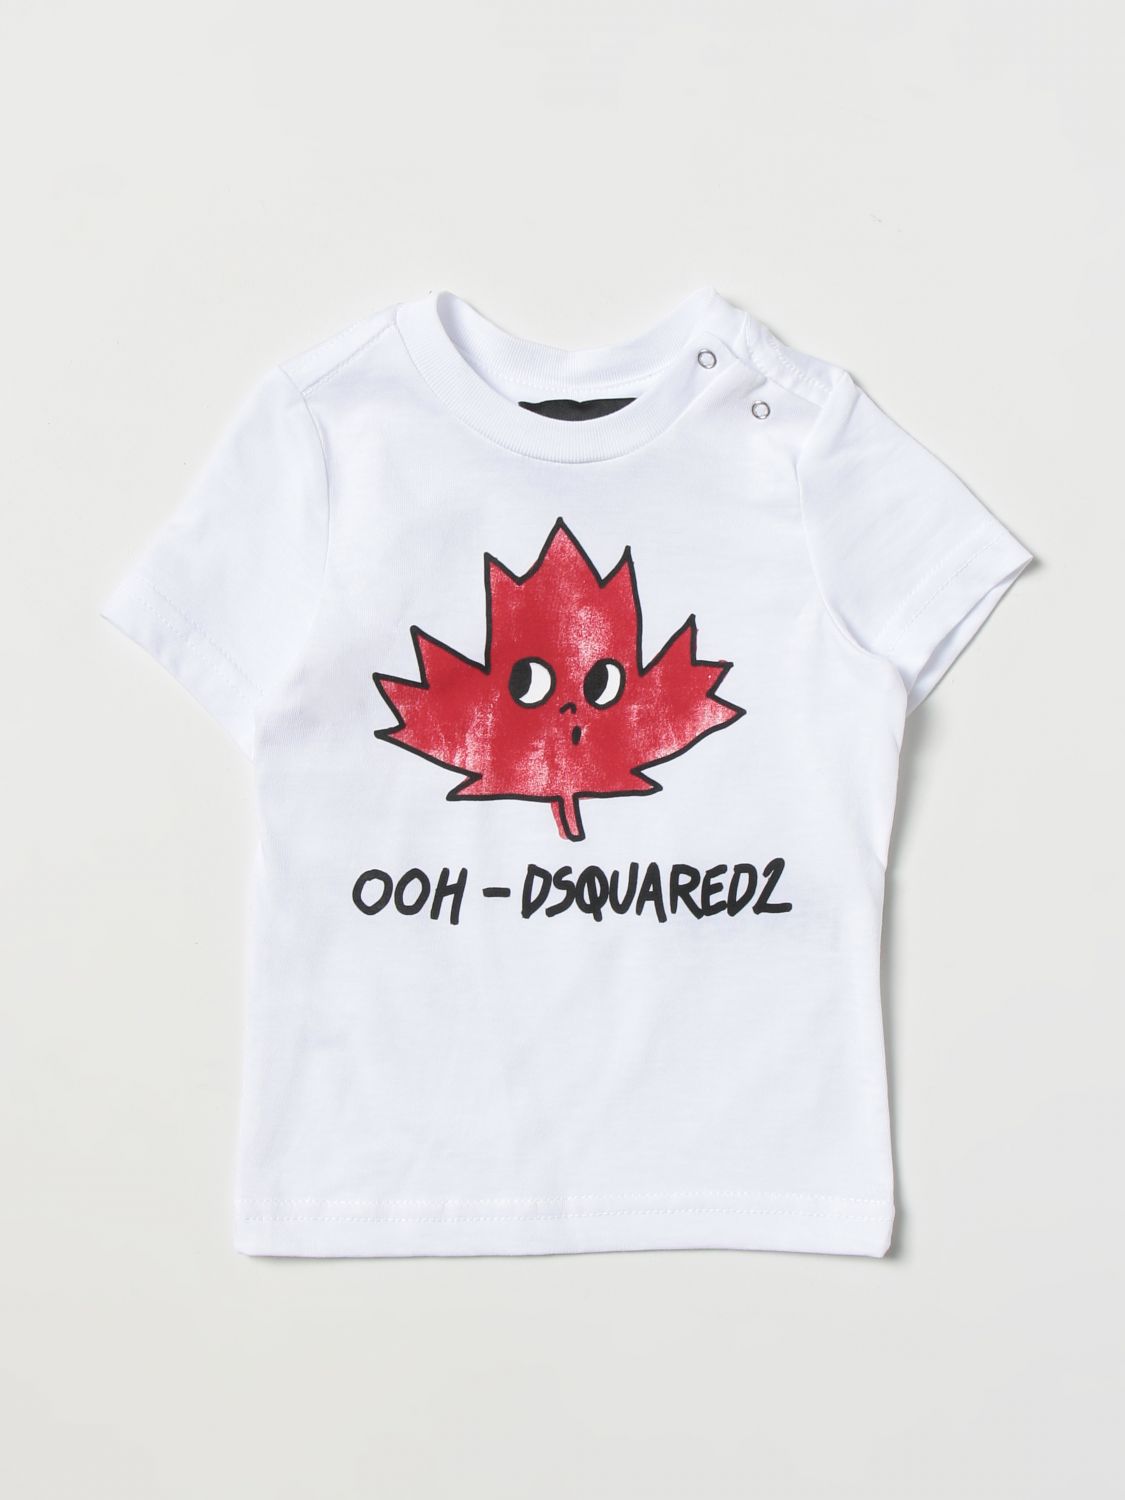 Dsquared2 Junior Babies' T-shirt  Kinder Farbe Weiss In White